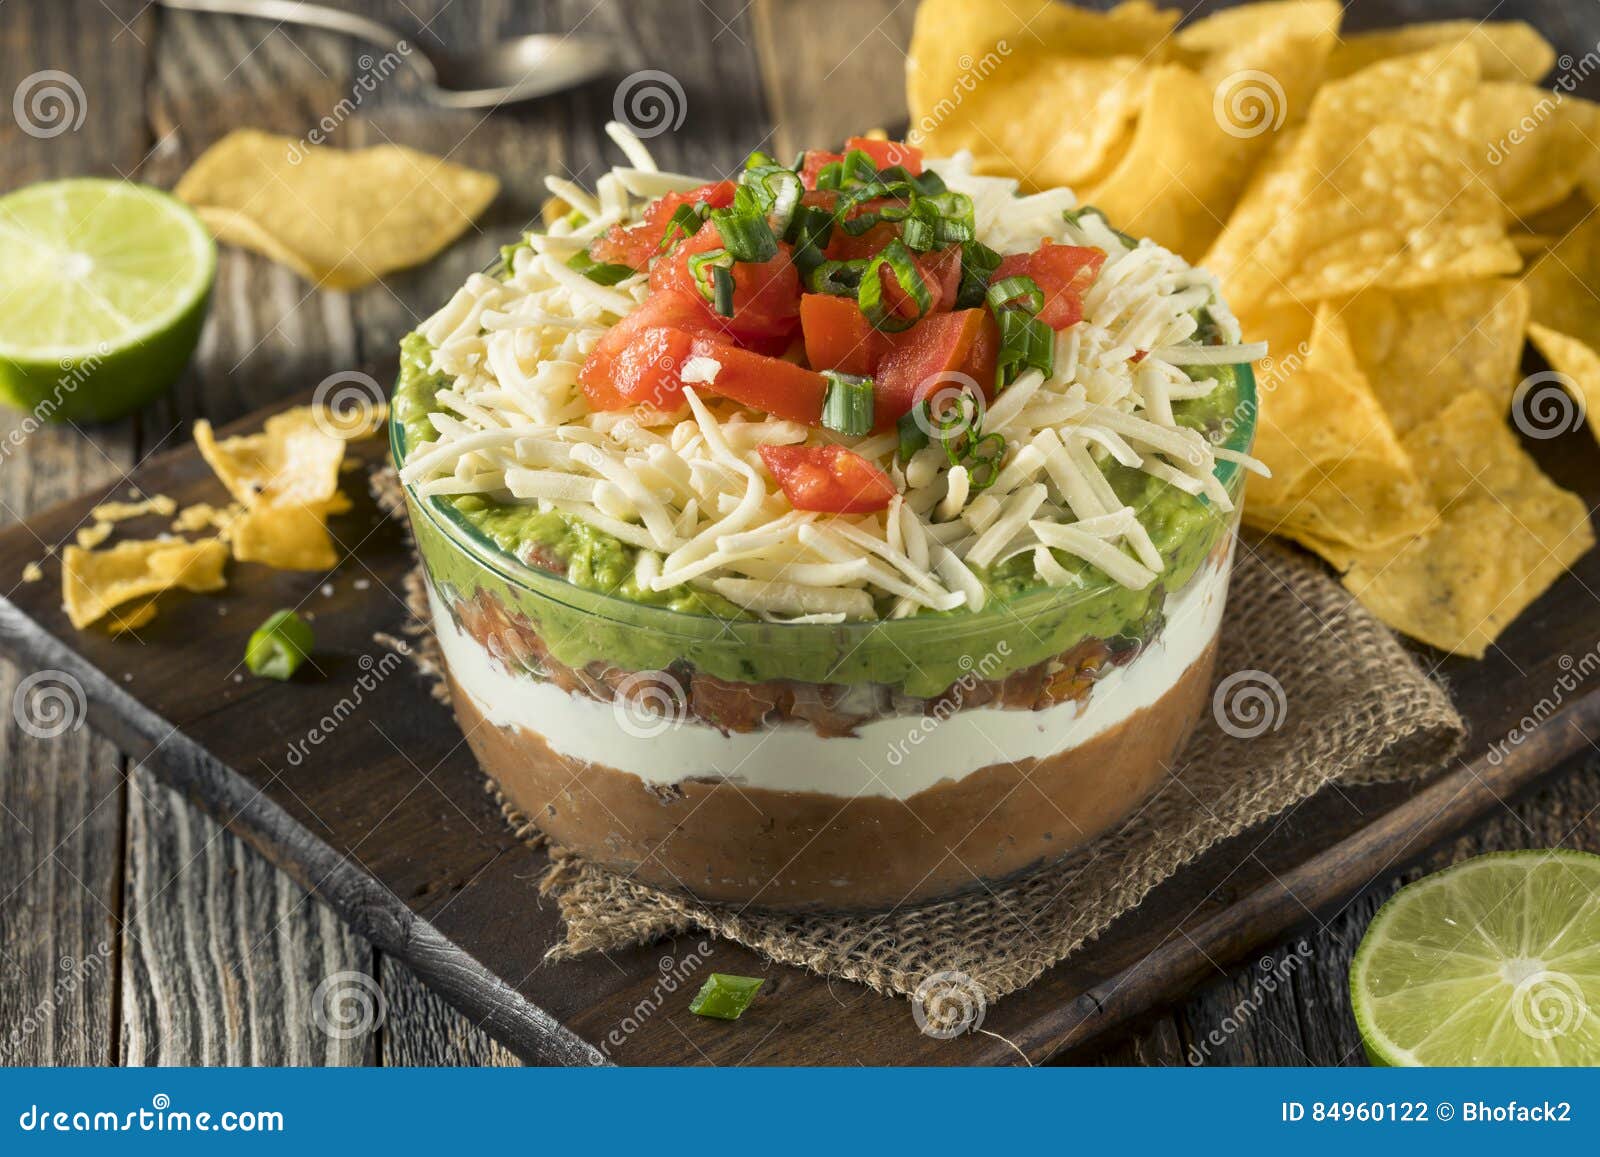 homemade mexican 7 layer dip